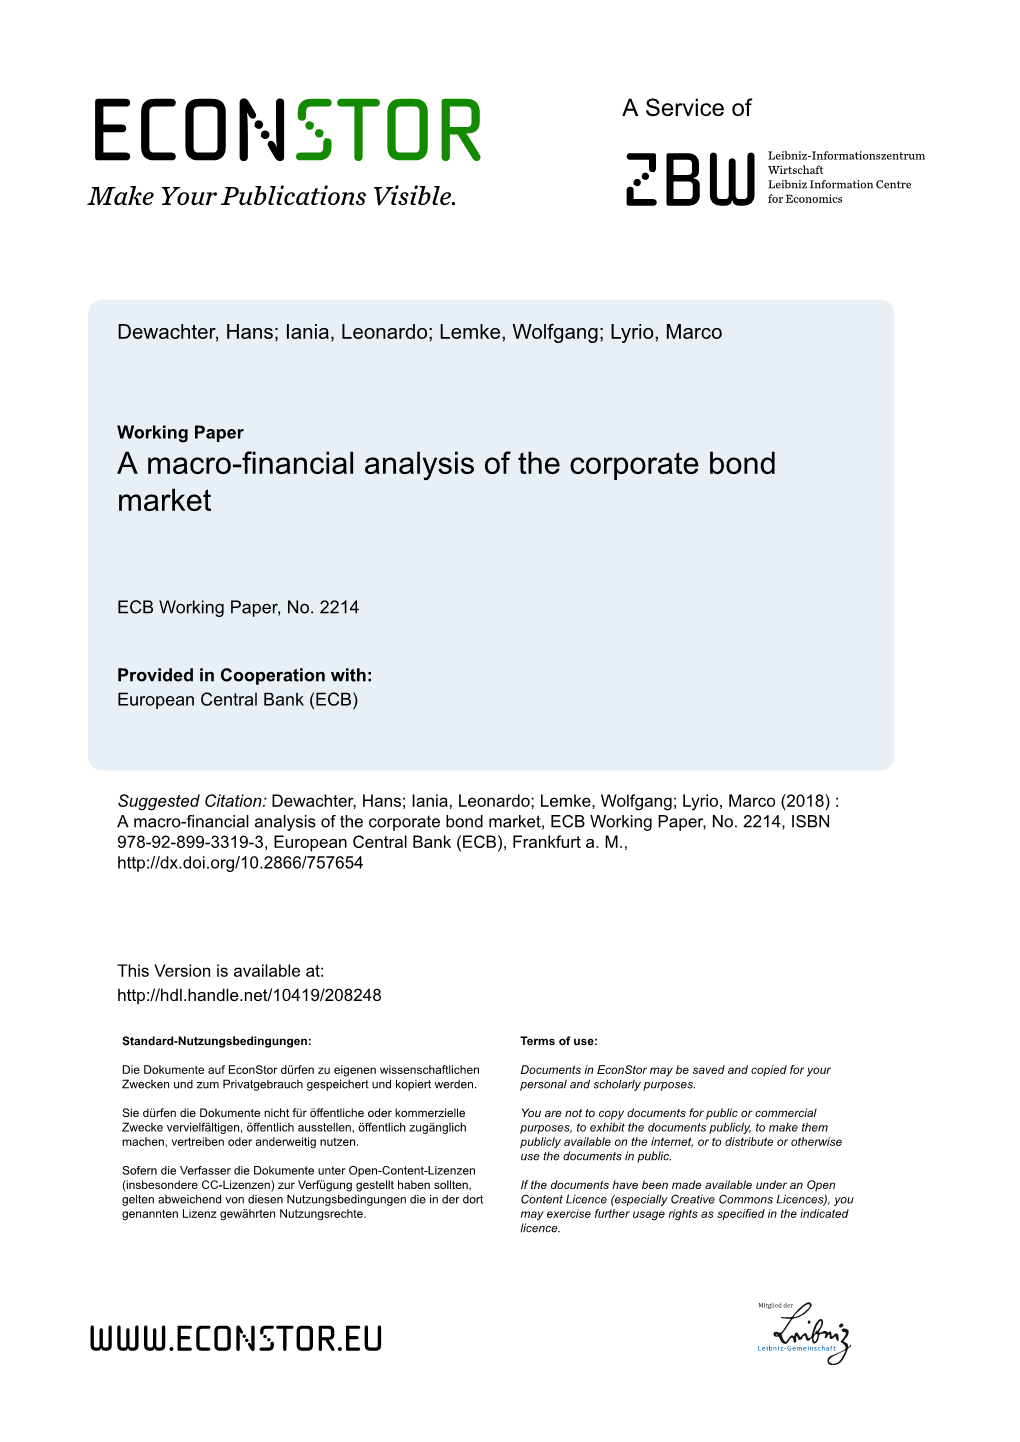 A Macro-Financial Analysis of the Corporate Bond Market